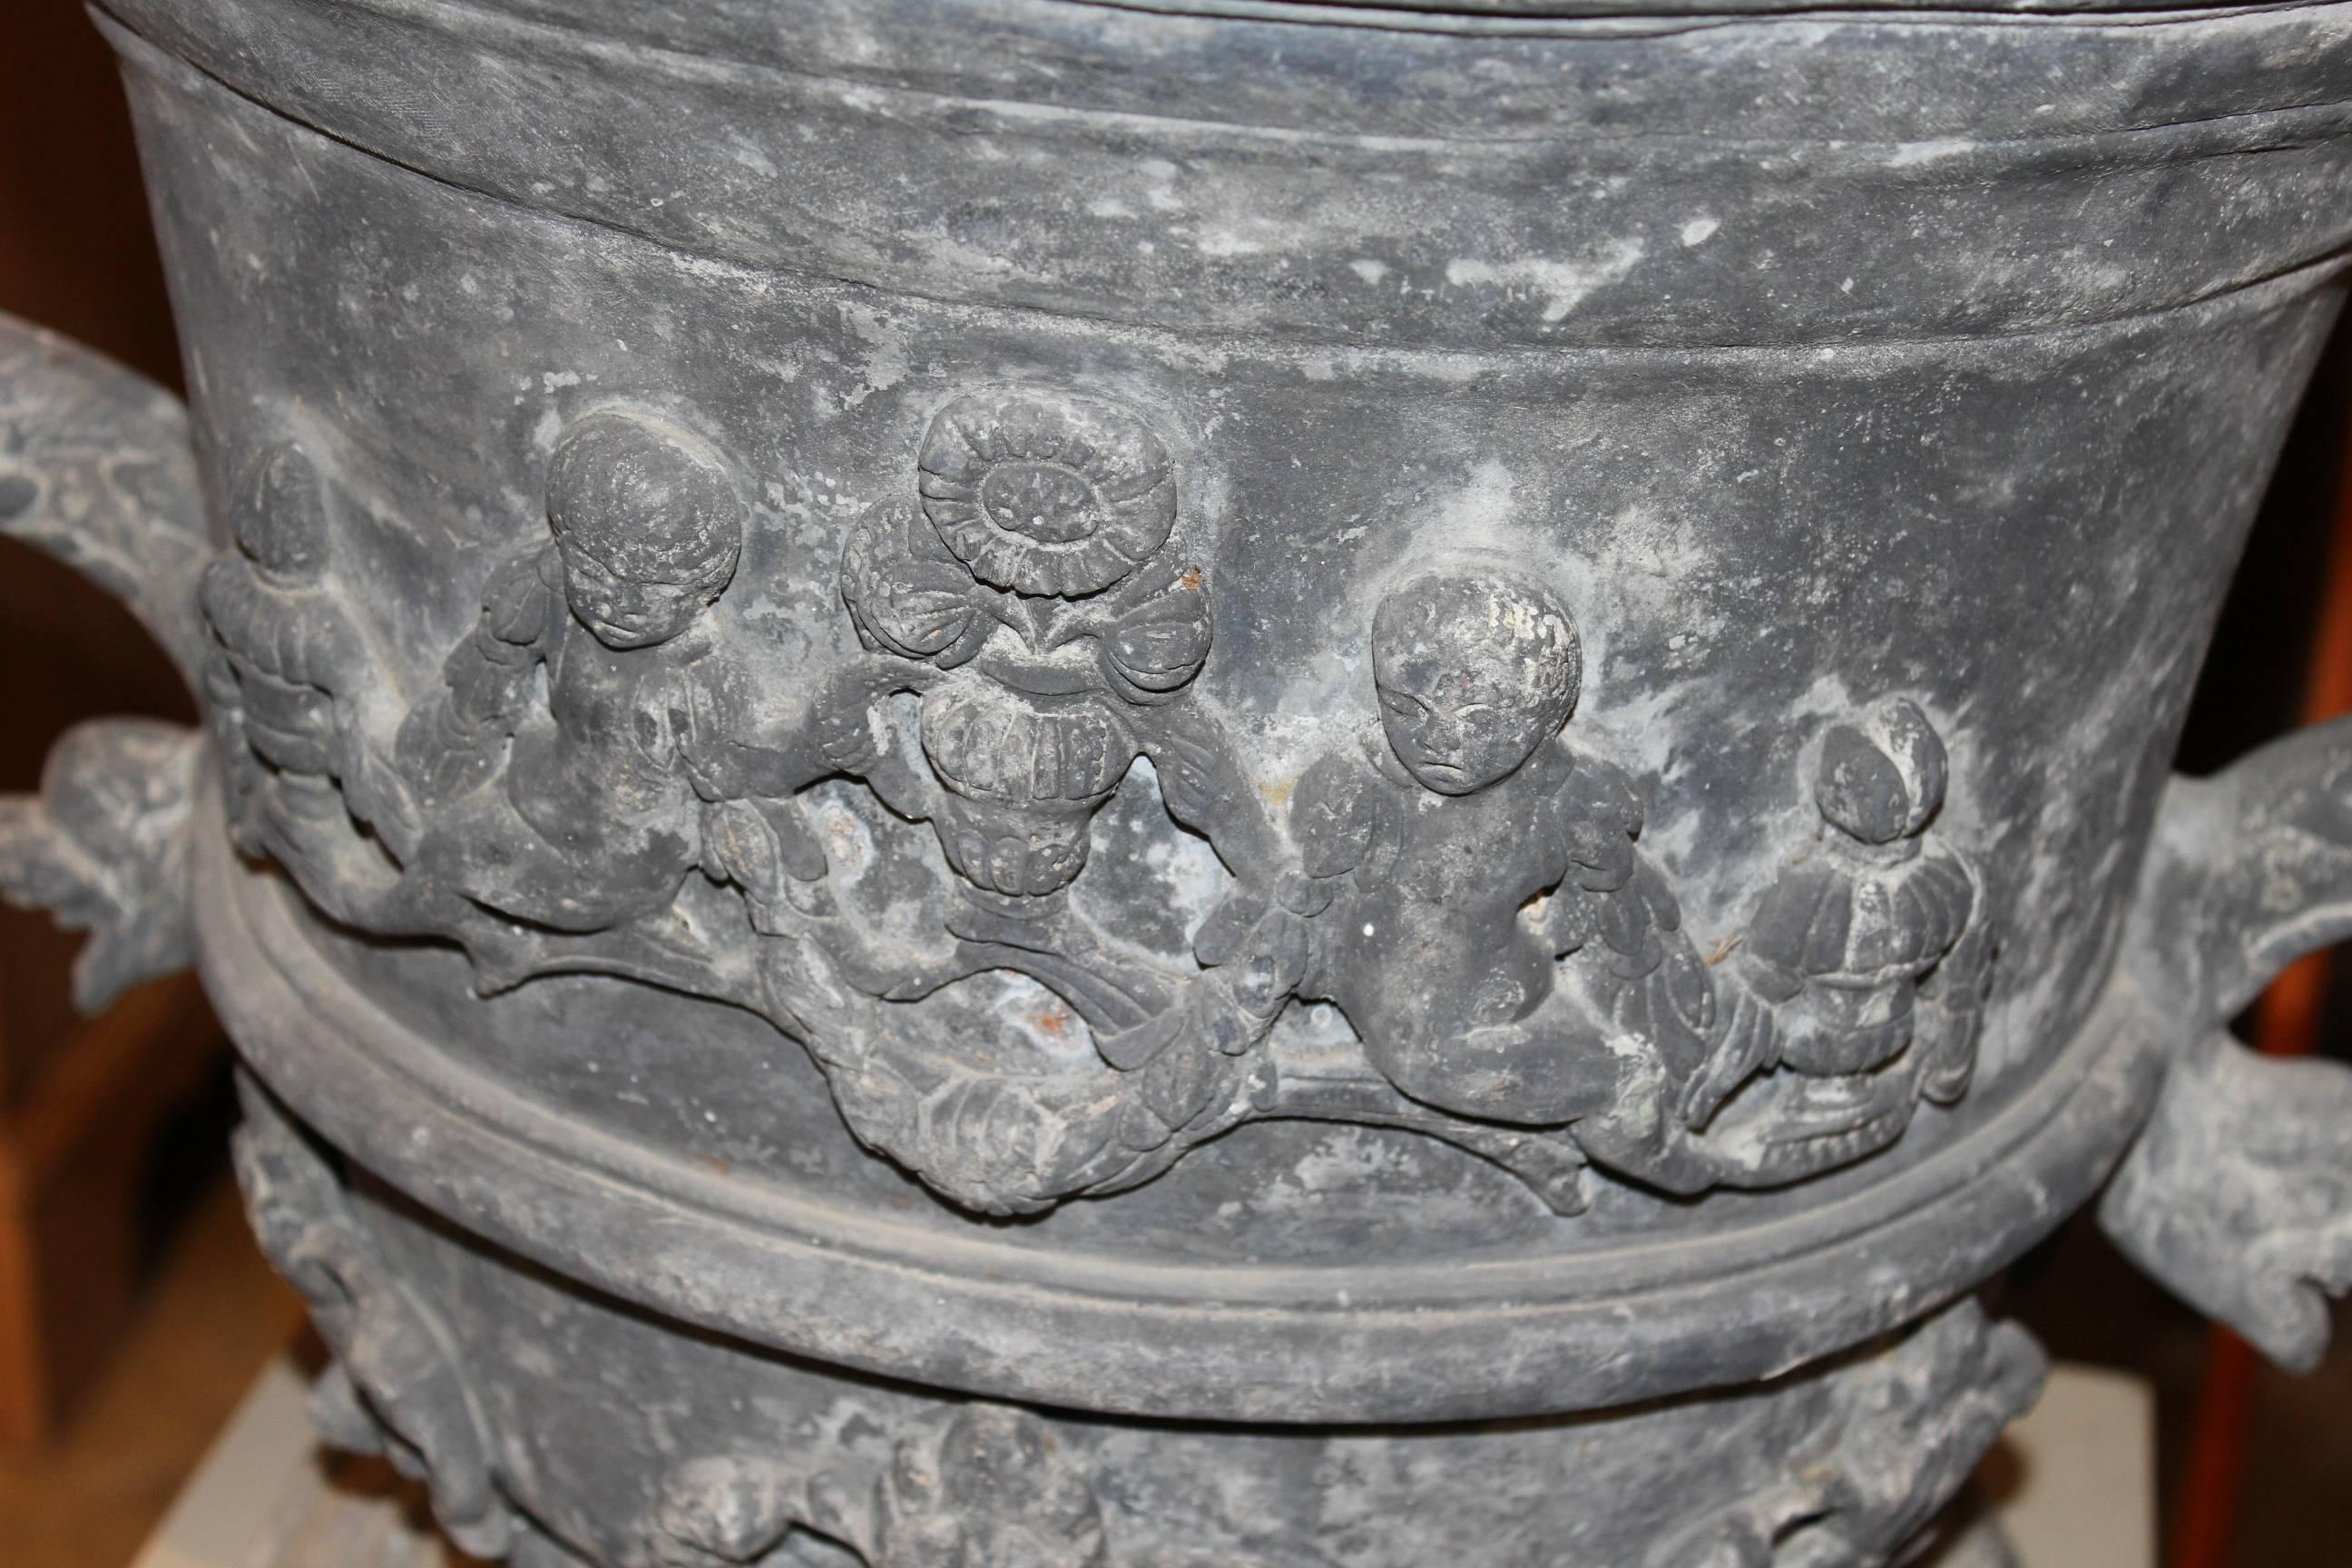 20th Century Pair of Lead Urns with Figural Handles and Cherub Decoration